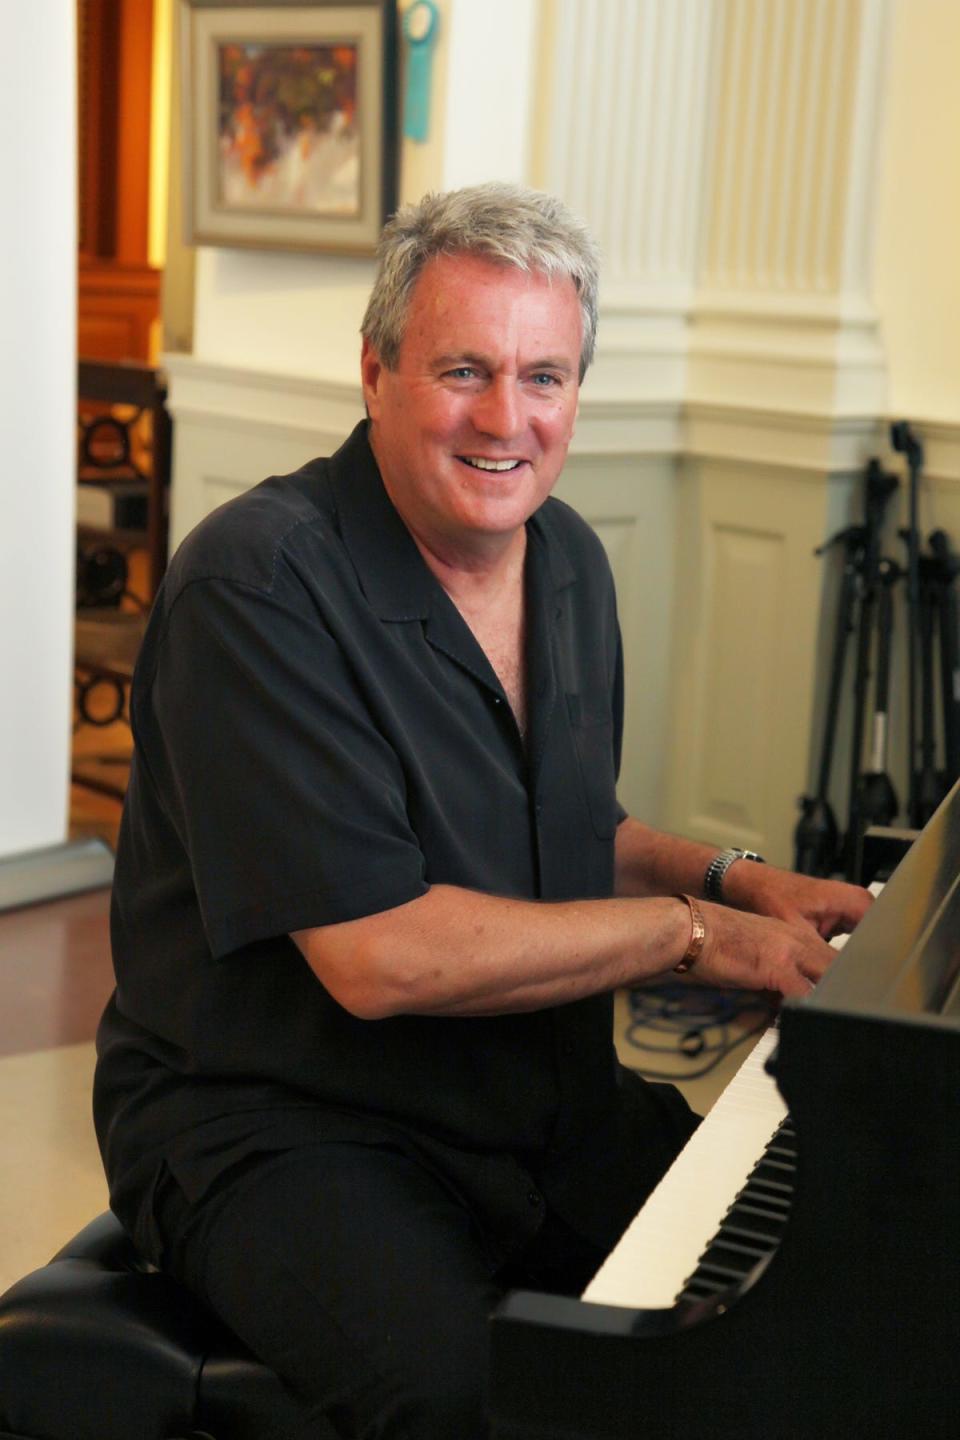 Pianist Fred Boyle will play in the Cape's first jazz piano summit at the Cultural Center of Cape Cod.